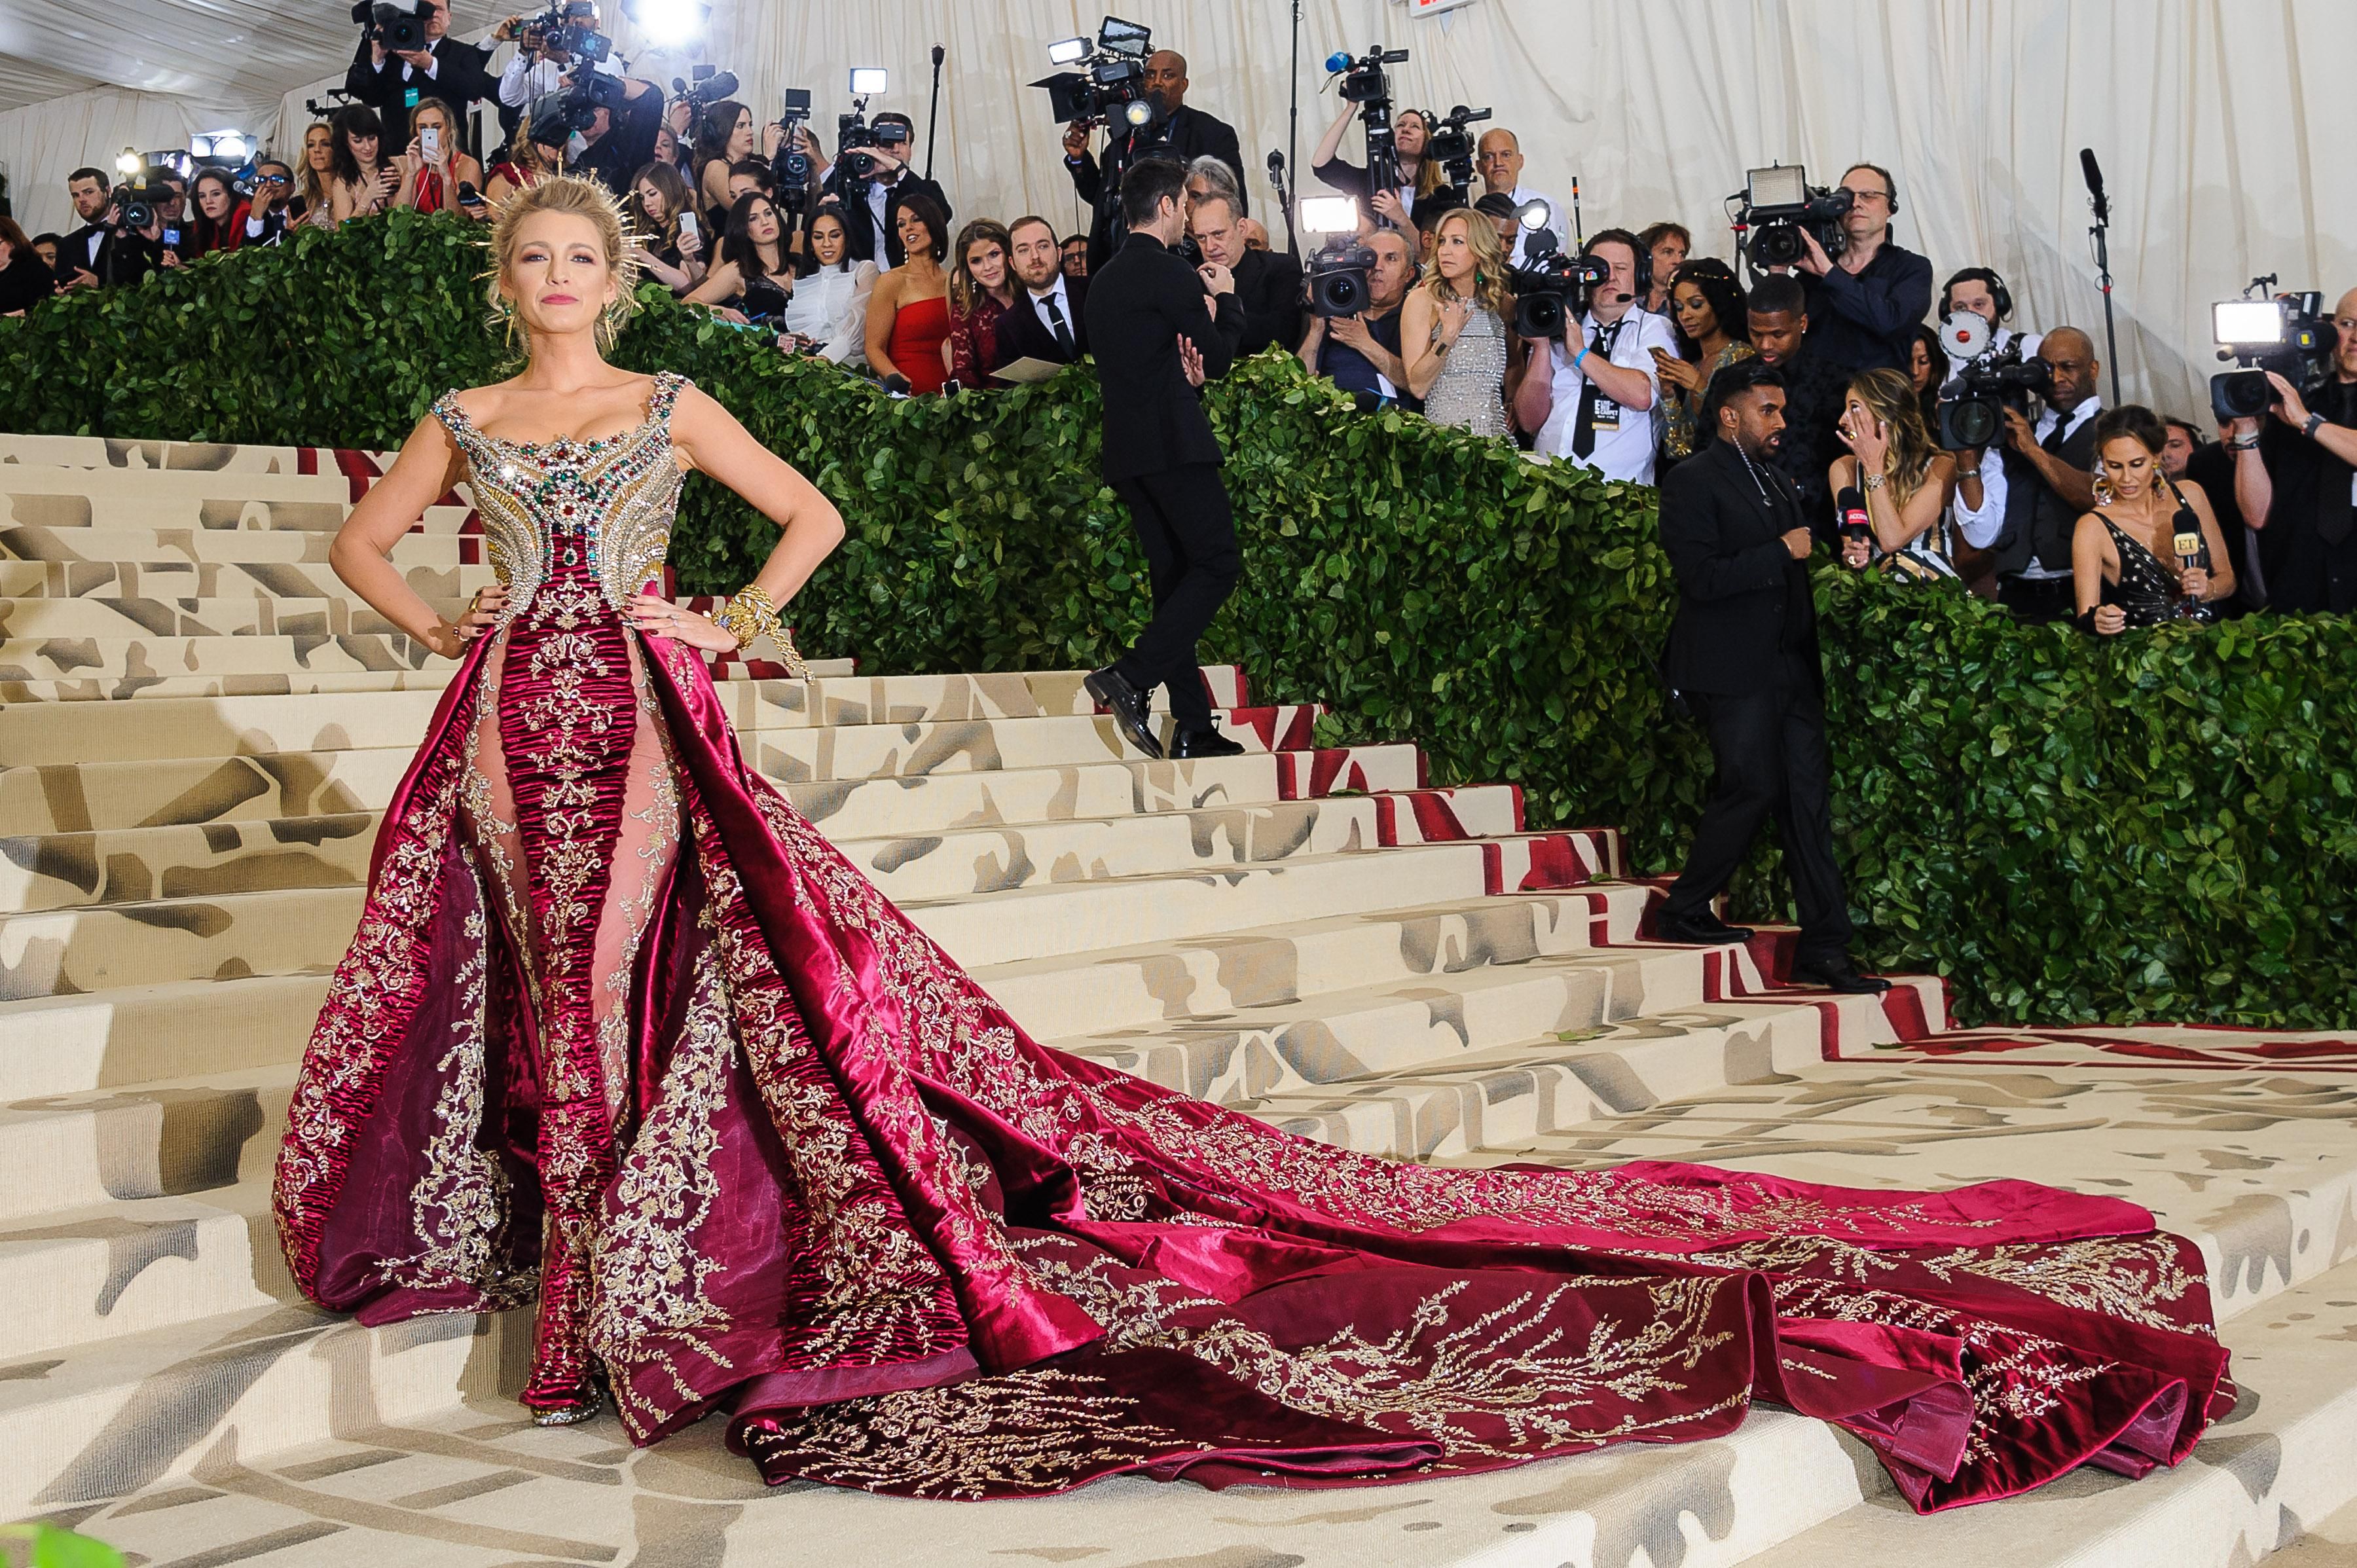 Met Gala 2022: There was a theme? – The Penndulum